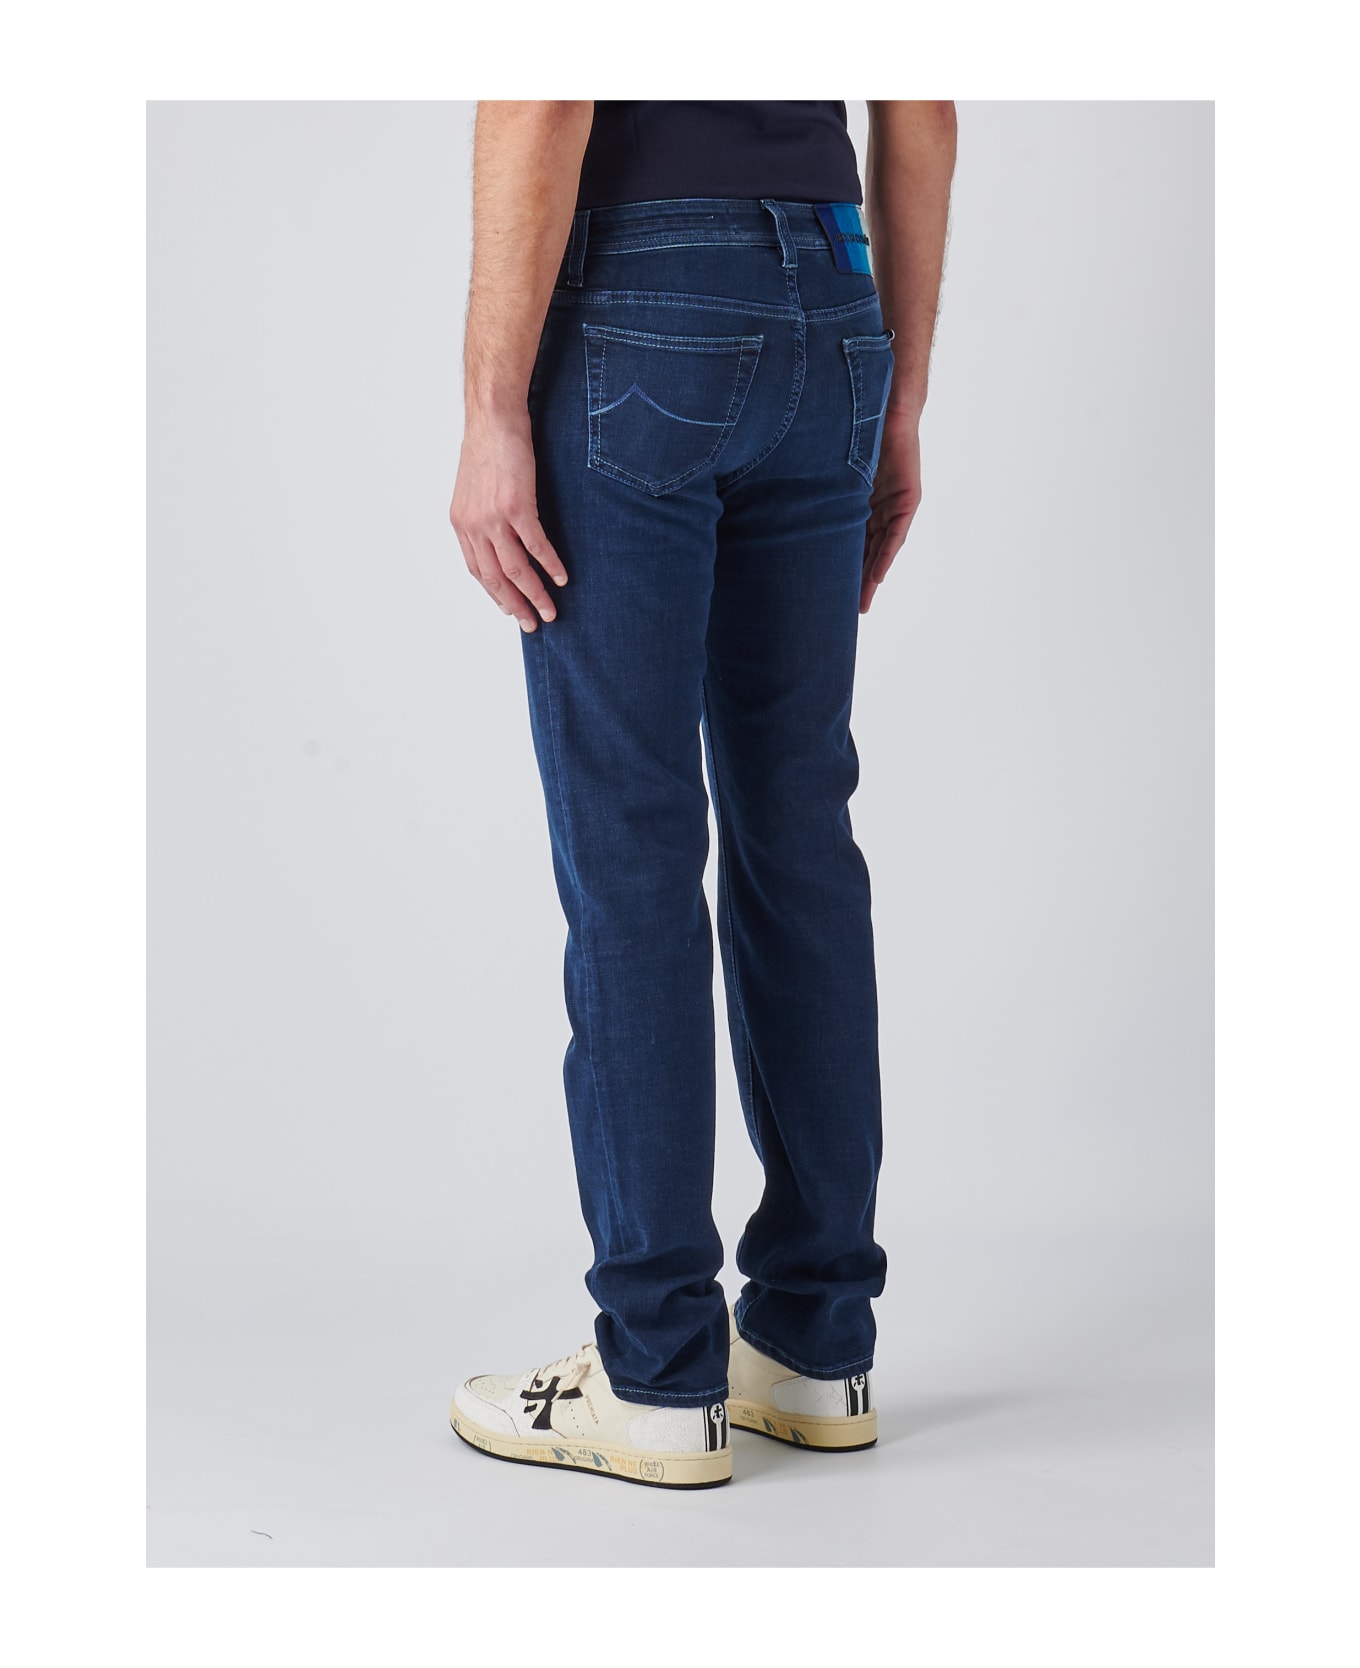 Jacob Cohen Pantalone Slim Fit With Zip Bard Trousers - DENIM SCURO ボトムス